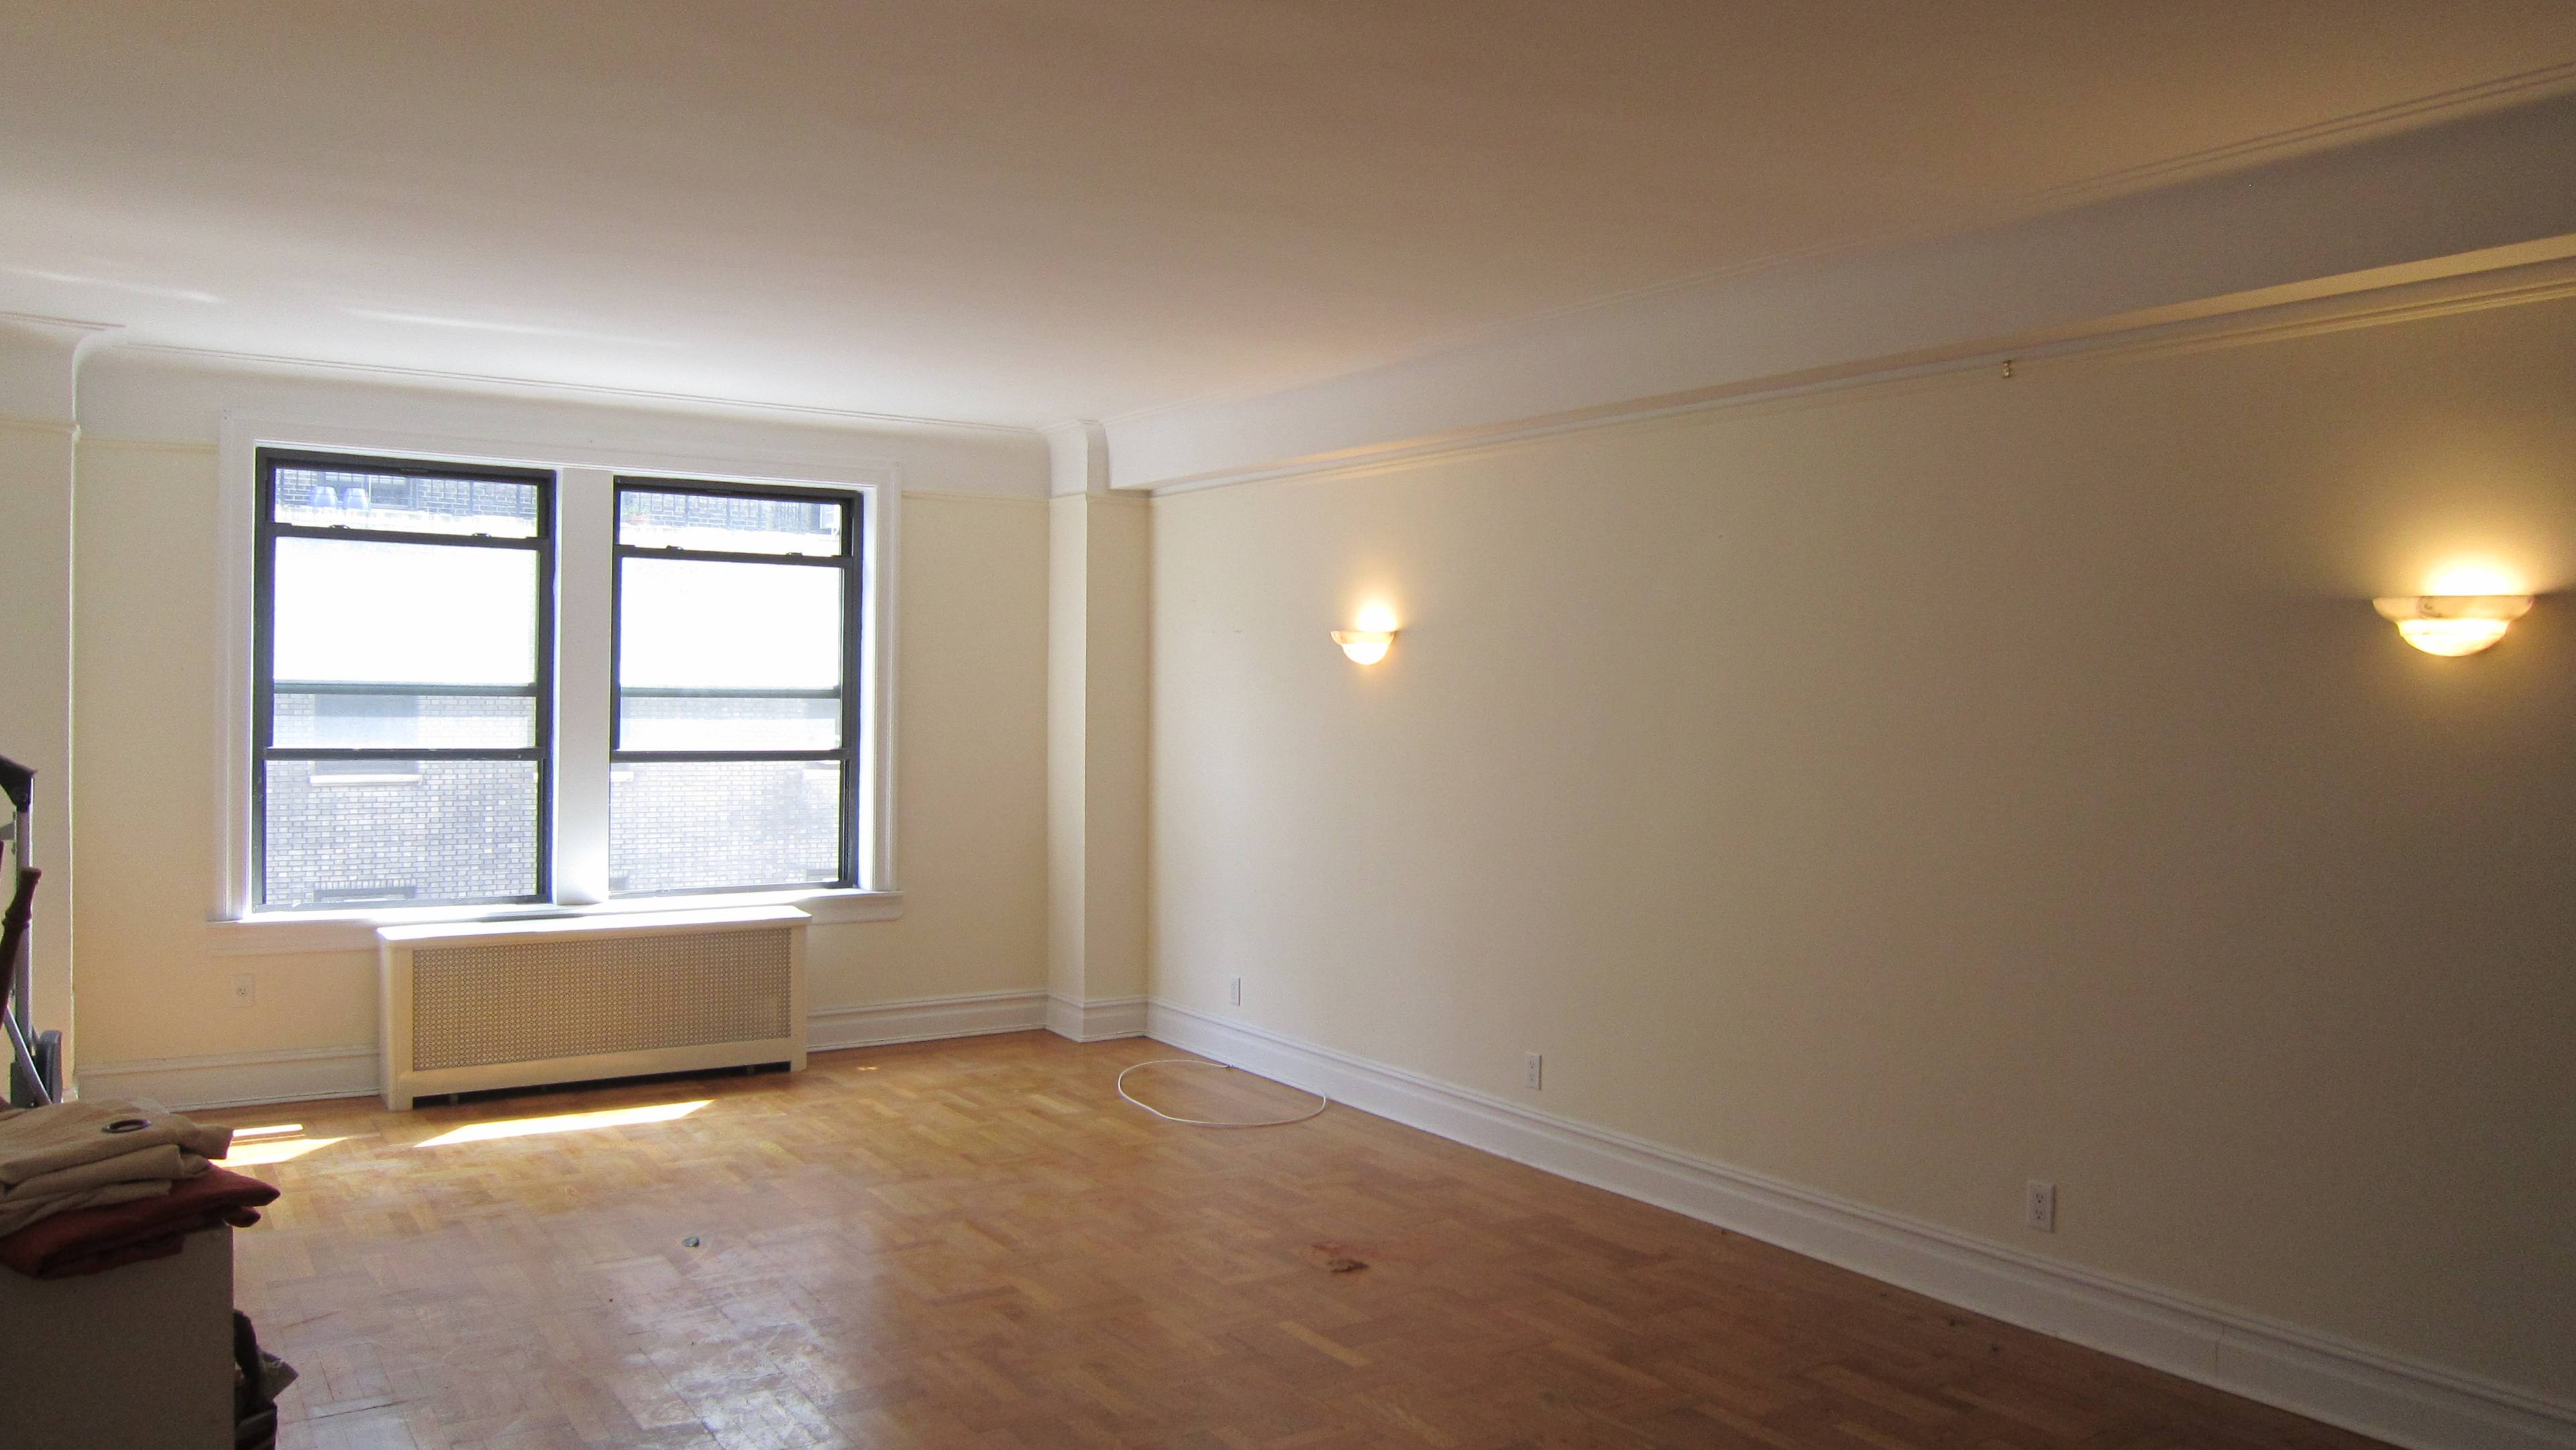 2  BR 2 BA Spacious Eat-In-Kitchen W/D 1600 SF gorgeous Riverside Drive apartment. Best location in Upper West Side